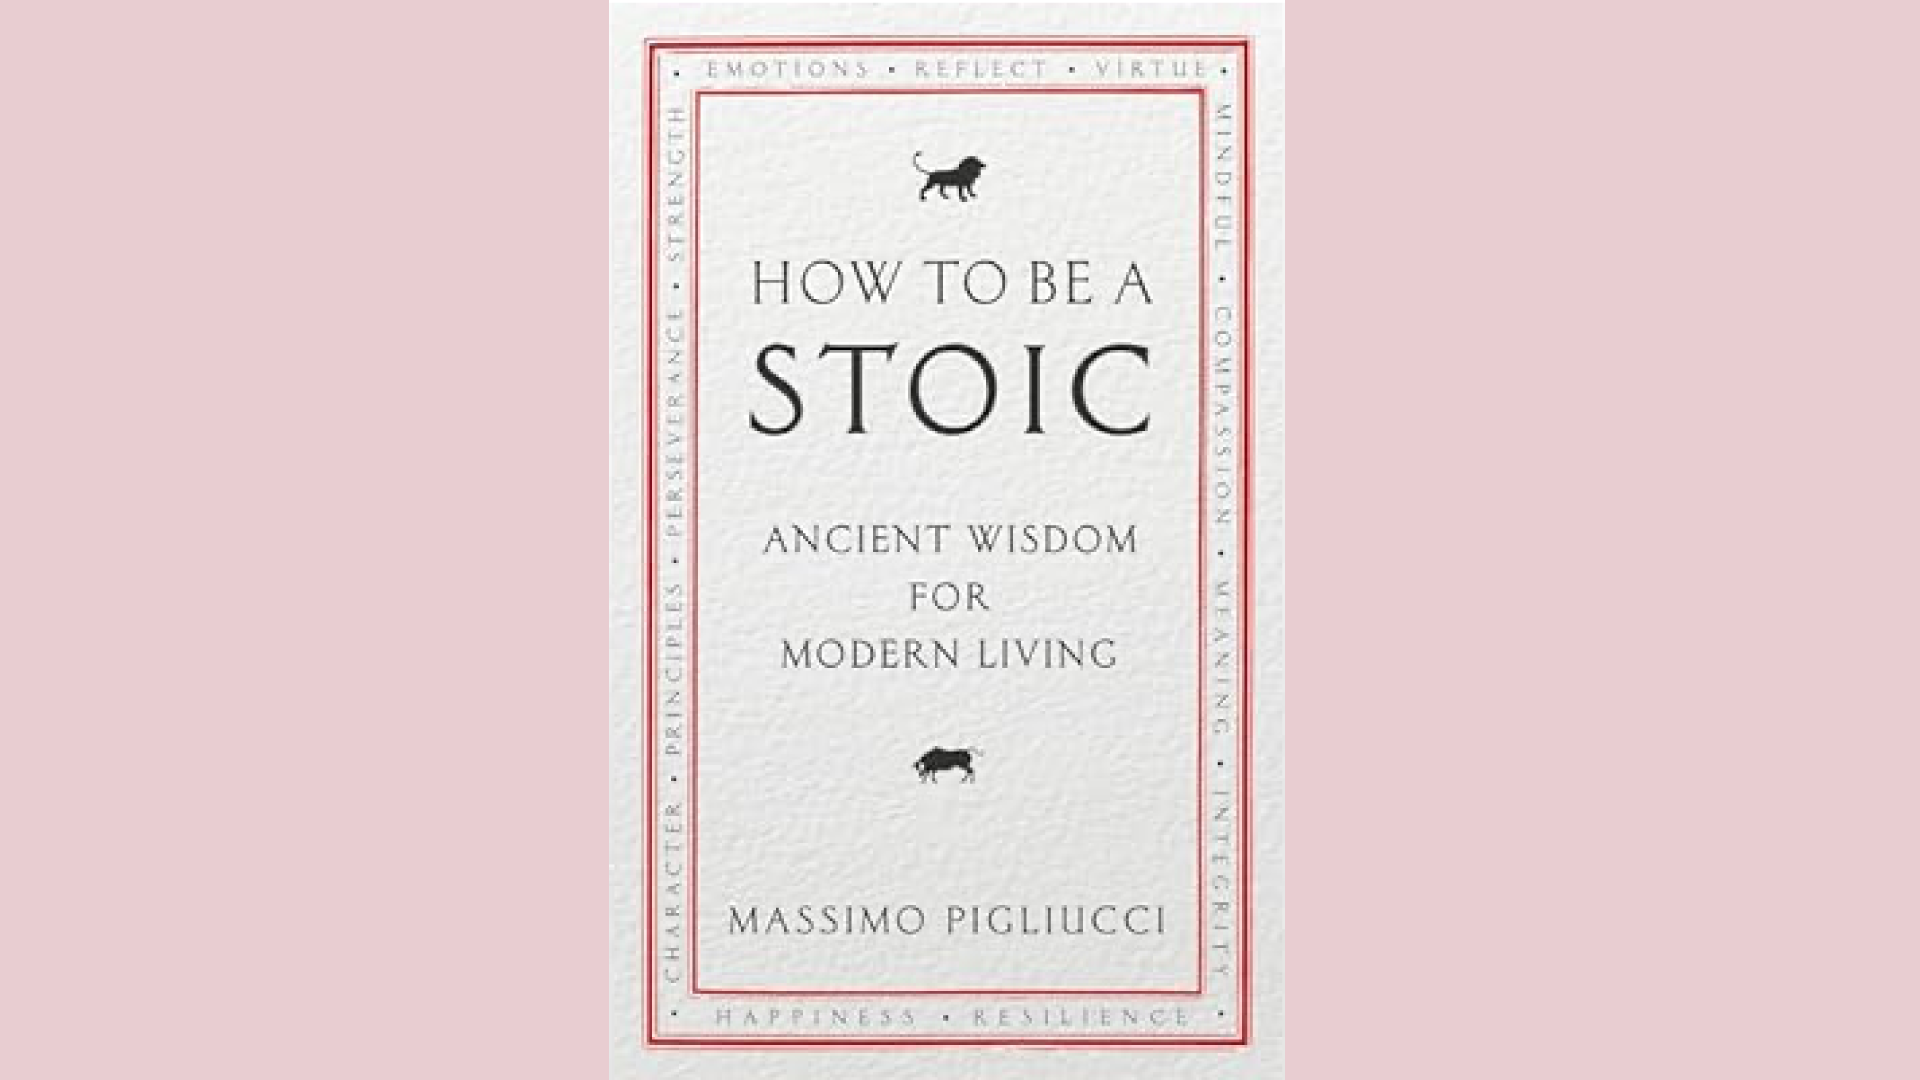 Summary: How to Be a Stoic by Massimo Pigliucci